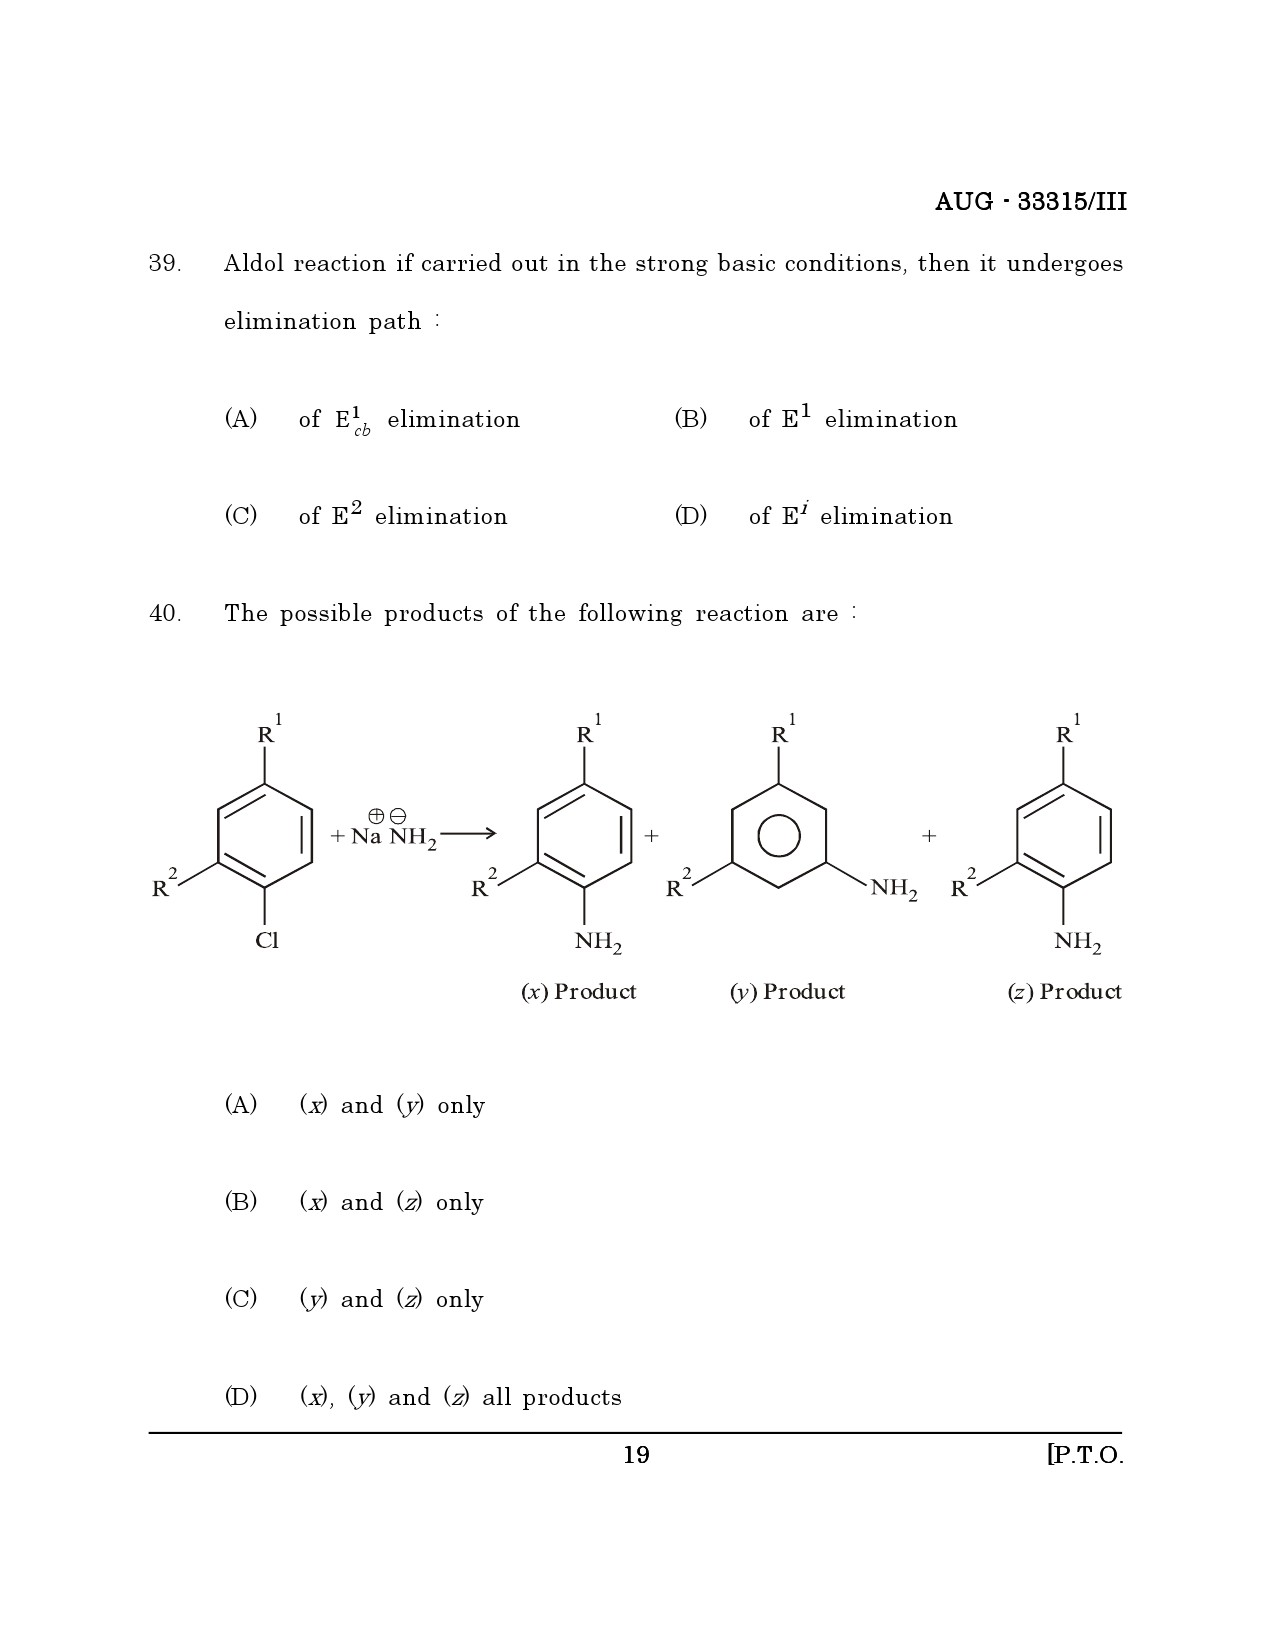 Maharashtra SET Chemical Sciences Question Paper III August 2015 18